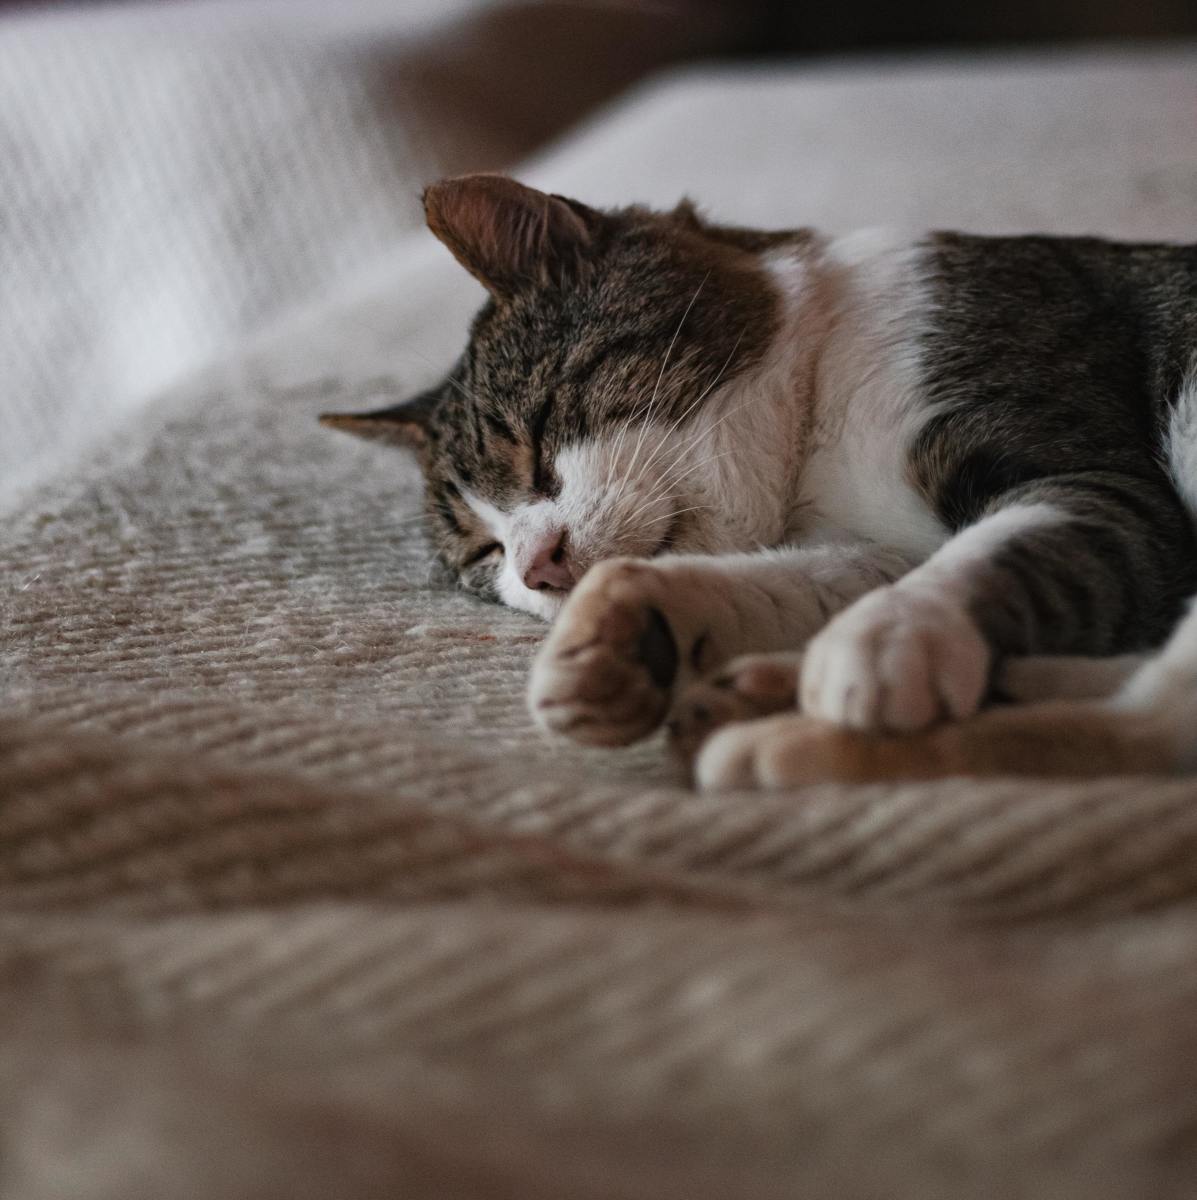 Is your cat nearing the end of his life, or is he just sick? 